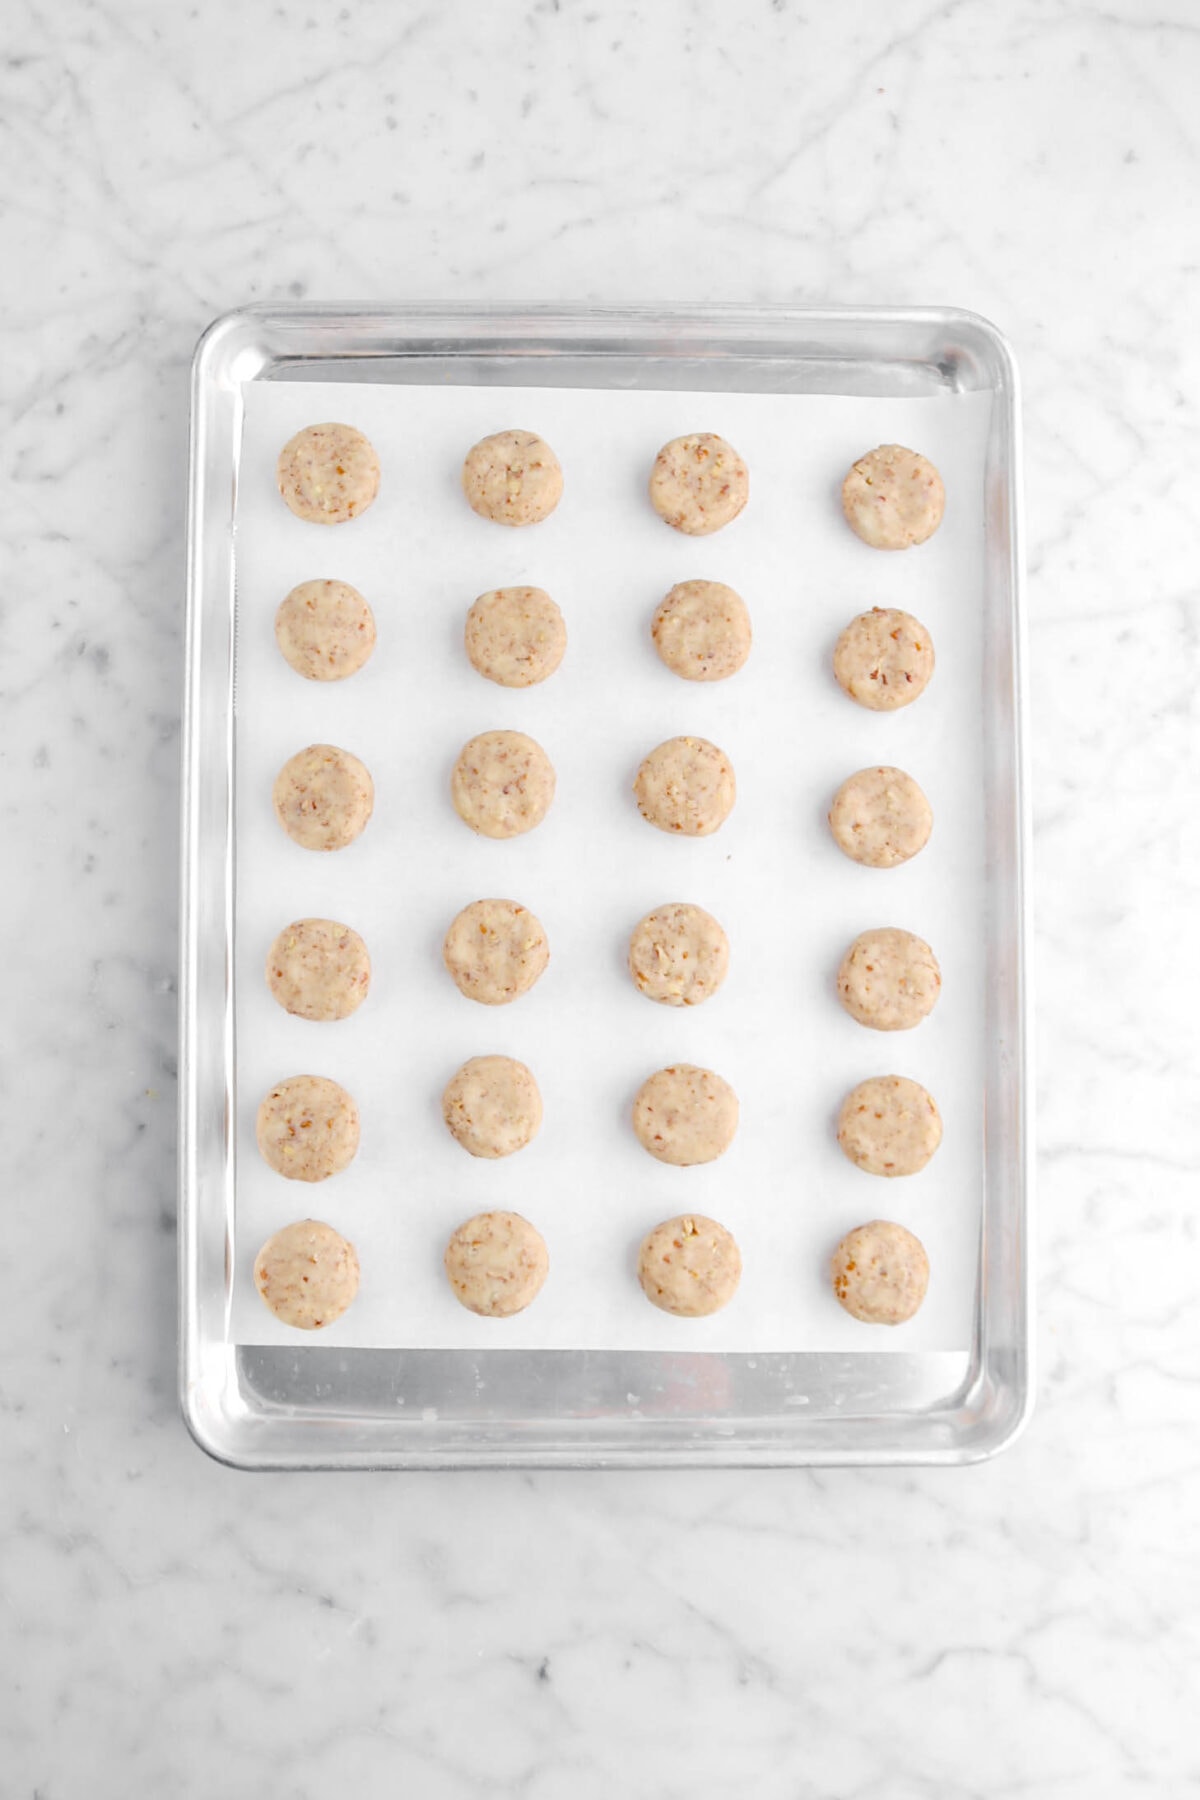 24 unbaked cookies on lined sheet pan